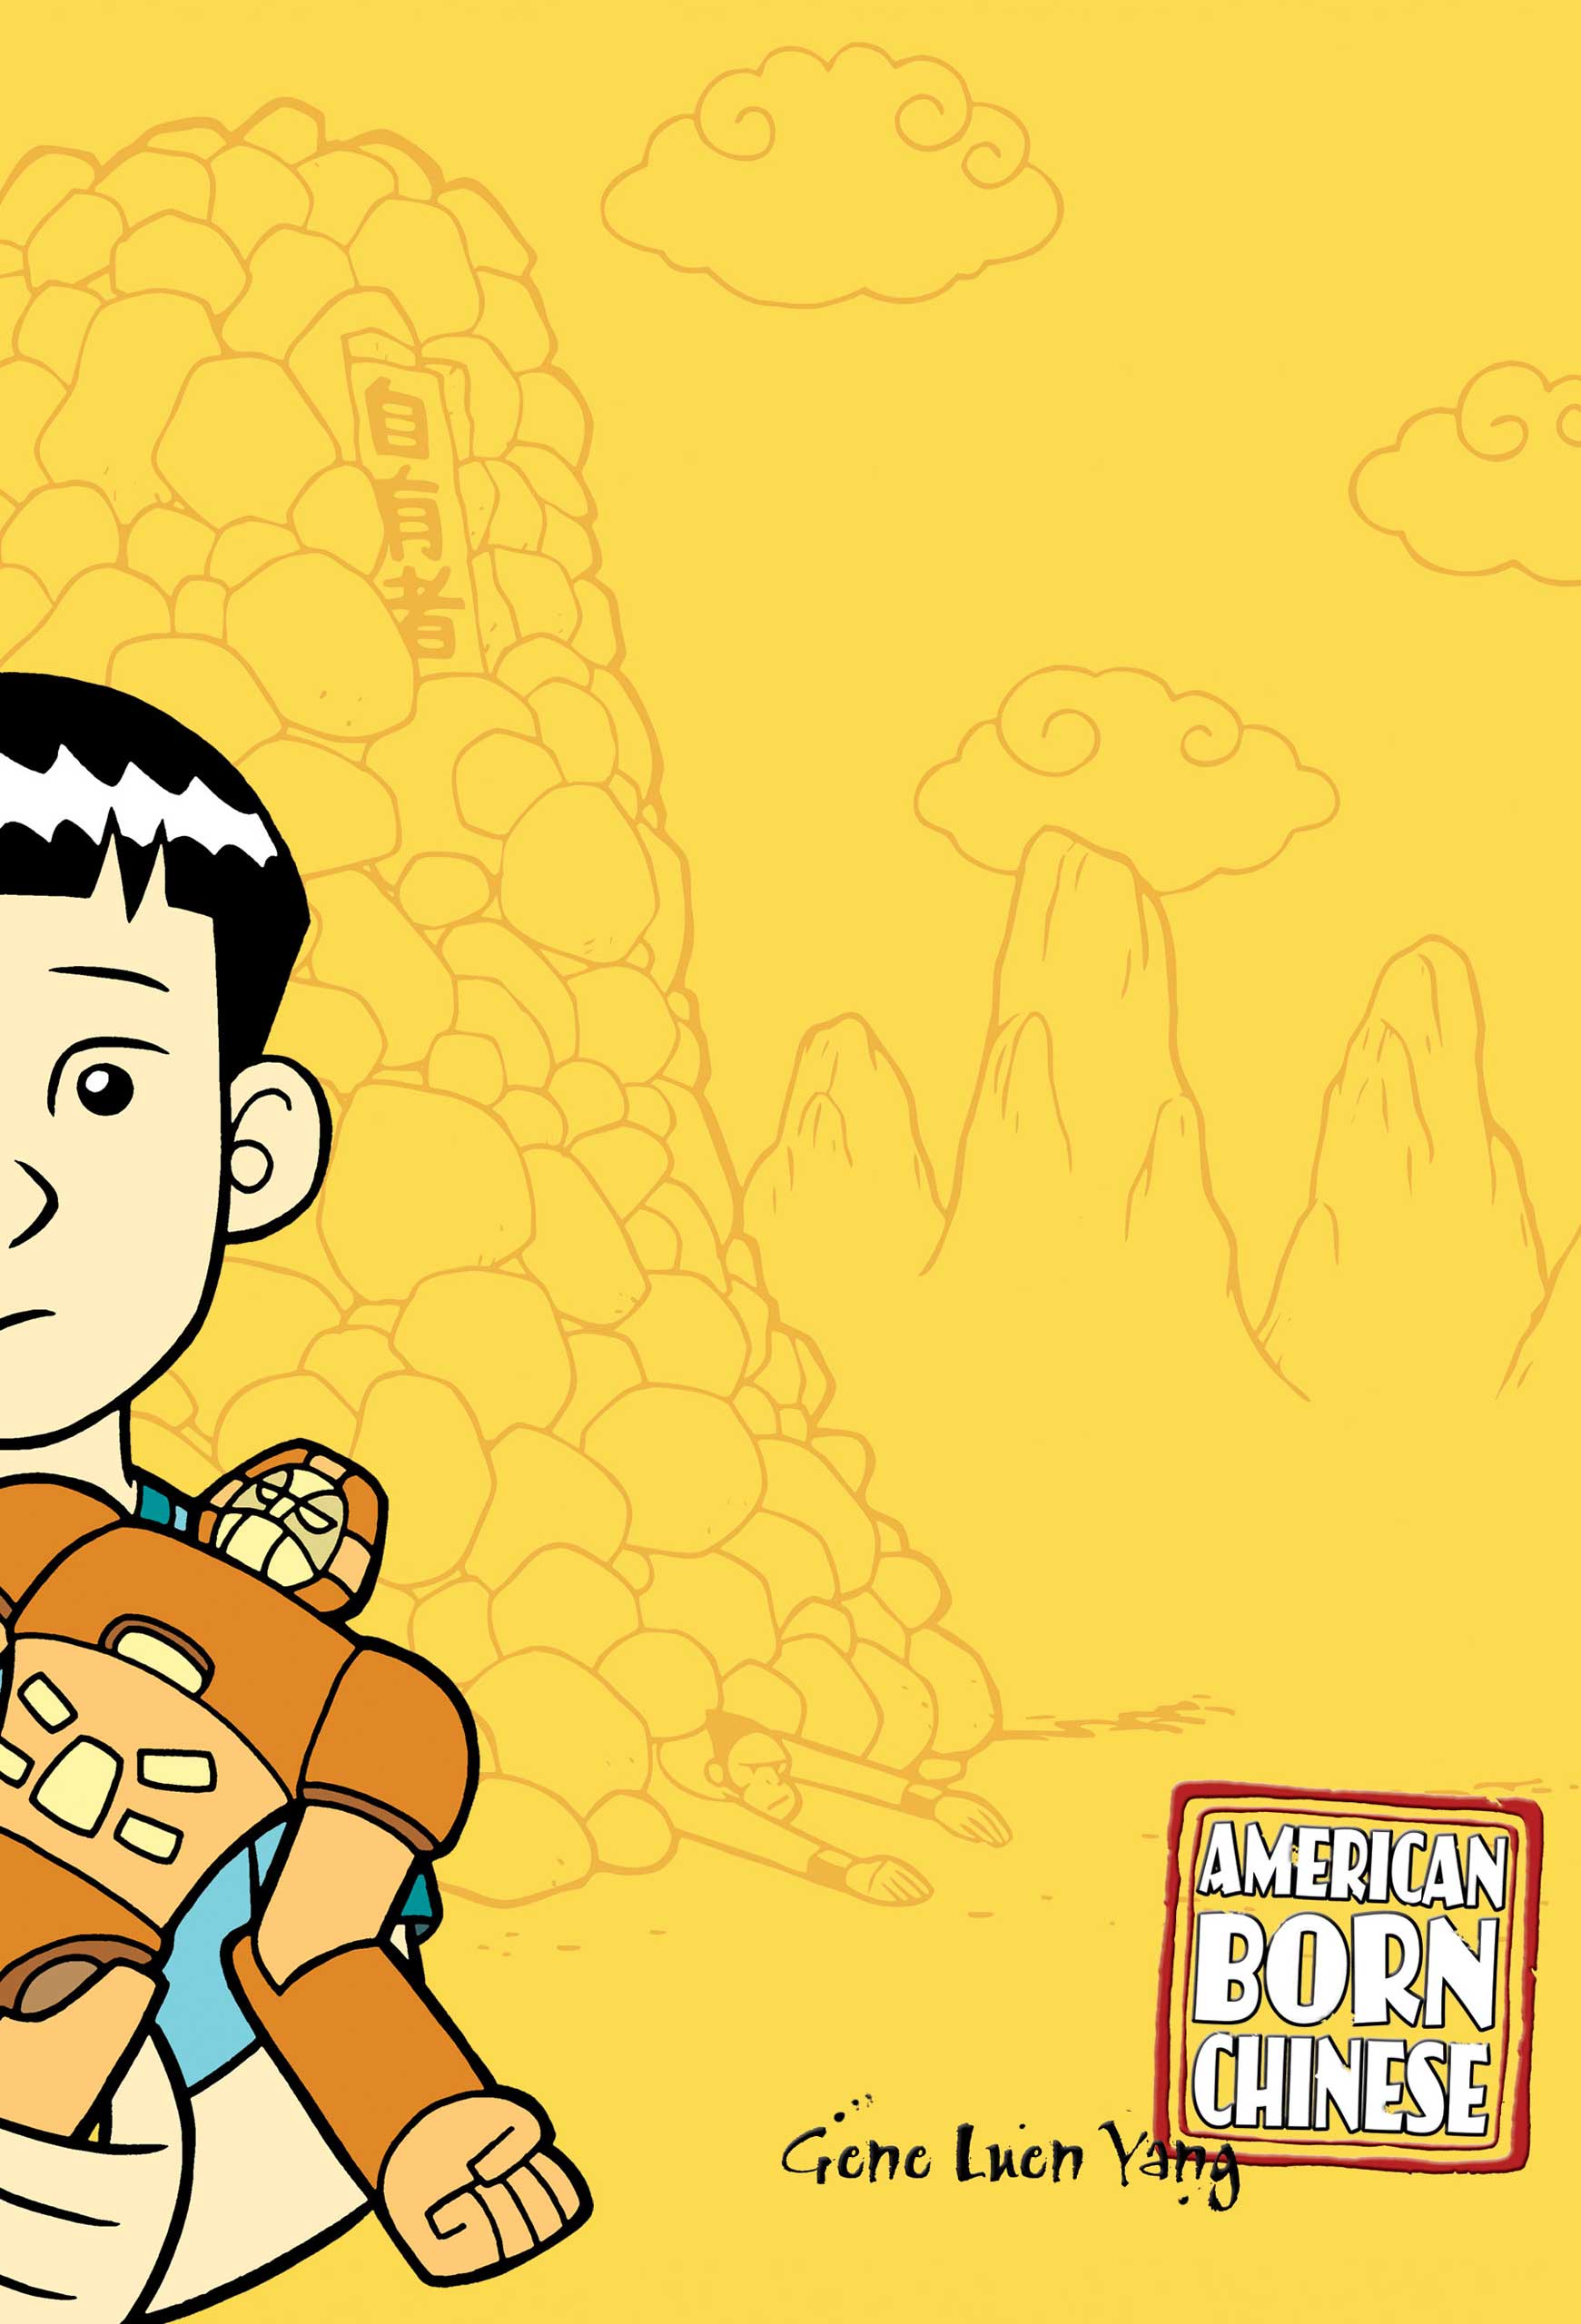 American Born Chinese, by Gene Luen Yang.
                              
                              
                              
                              A graphic novel that jumps back and forth between a Chinese folk tale and the stories of a young Asian American and his white alter-ego growing up in a San Francisco suburb.
                              
                              
                              
                              Buy now: American Born Chinese